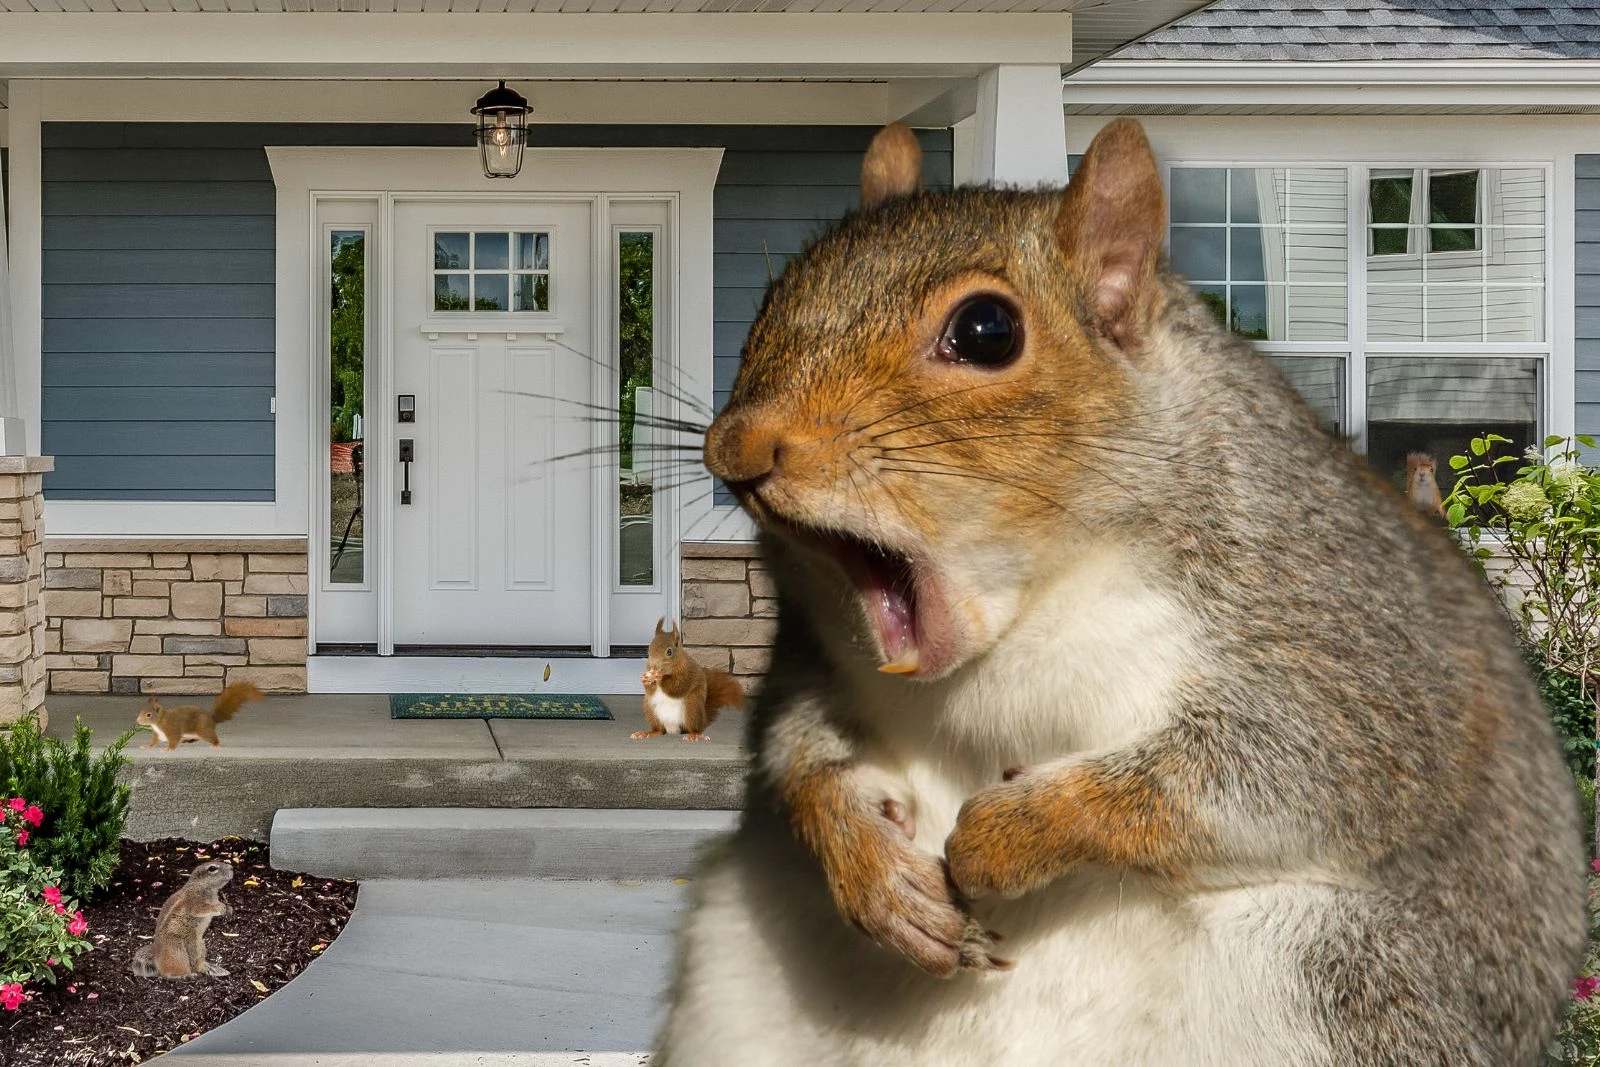 Is It Illegal to Keep a Squirrel As a Pet in Your Home?